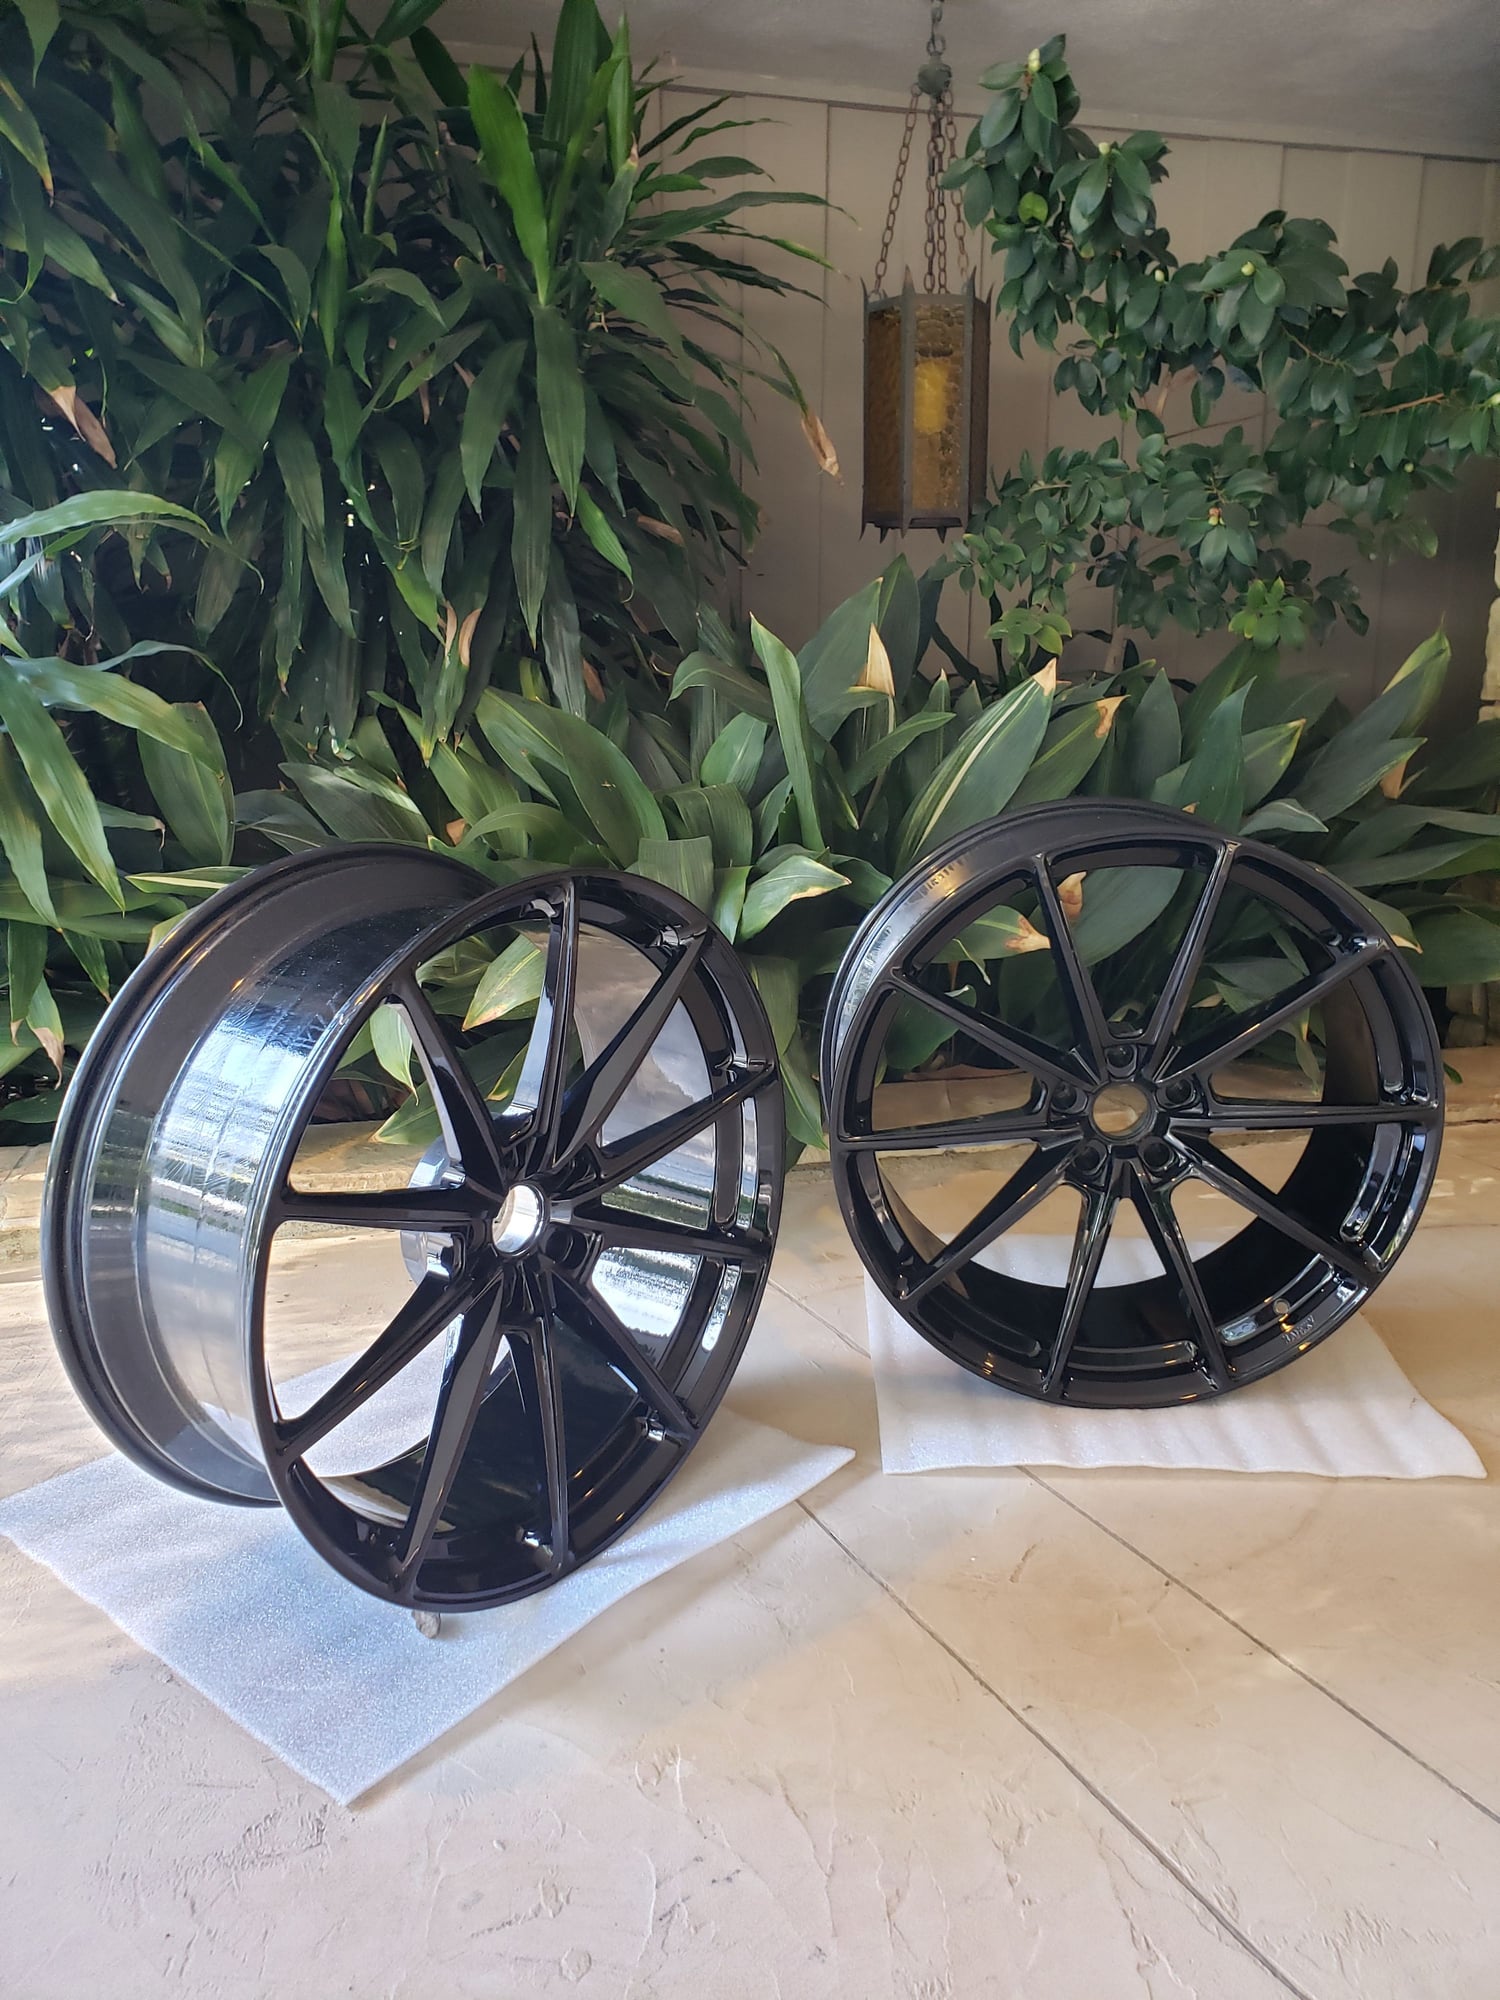 Wheels and Tires/Axles - 24" ANRKY WHEELS NEW CONDITION 5X130 - New - All Years Mercedes-Benz G-Class - Agoura Hills, CA 91301, United States